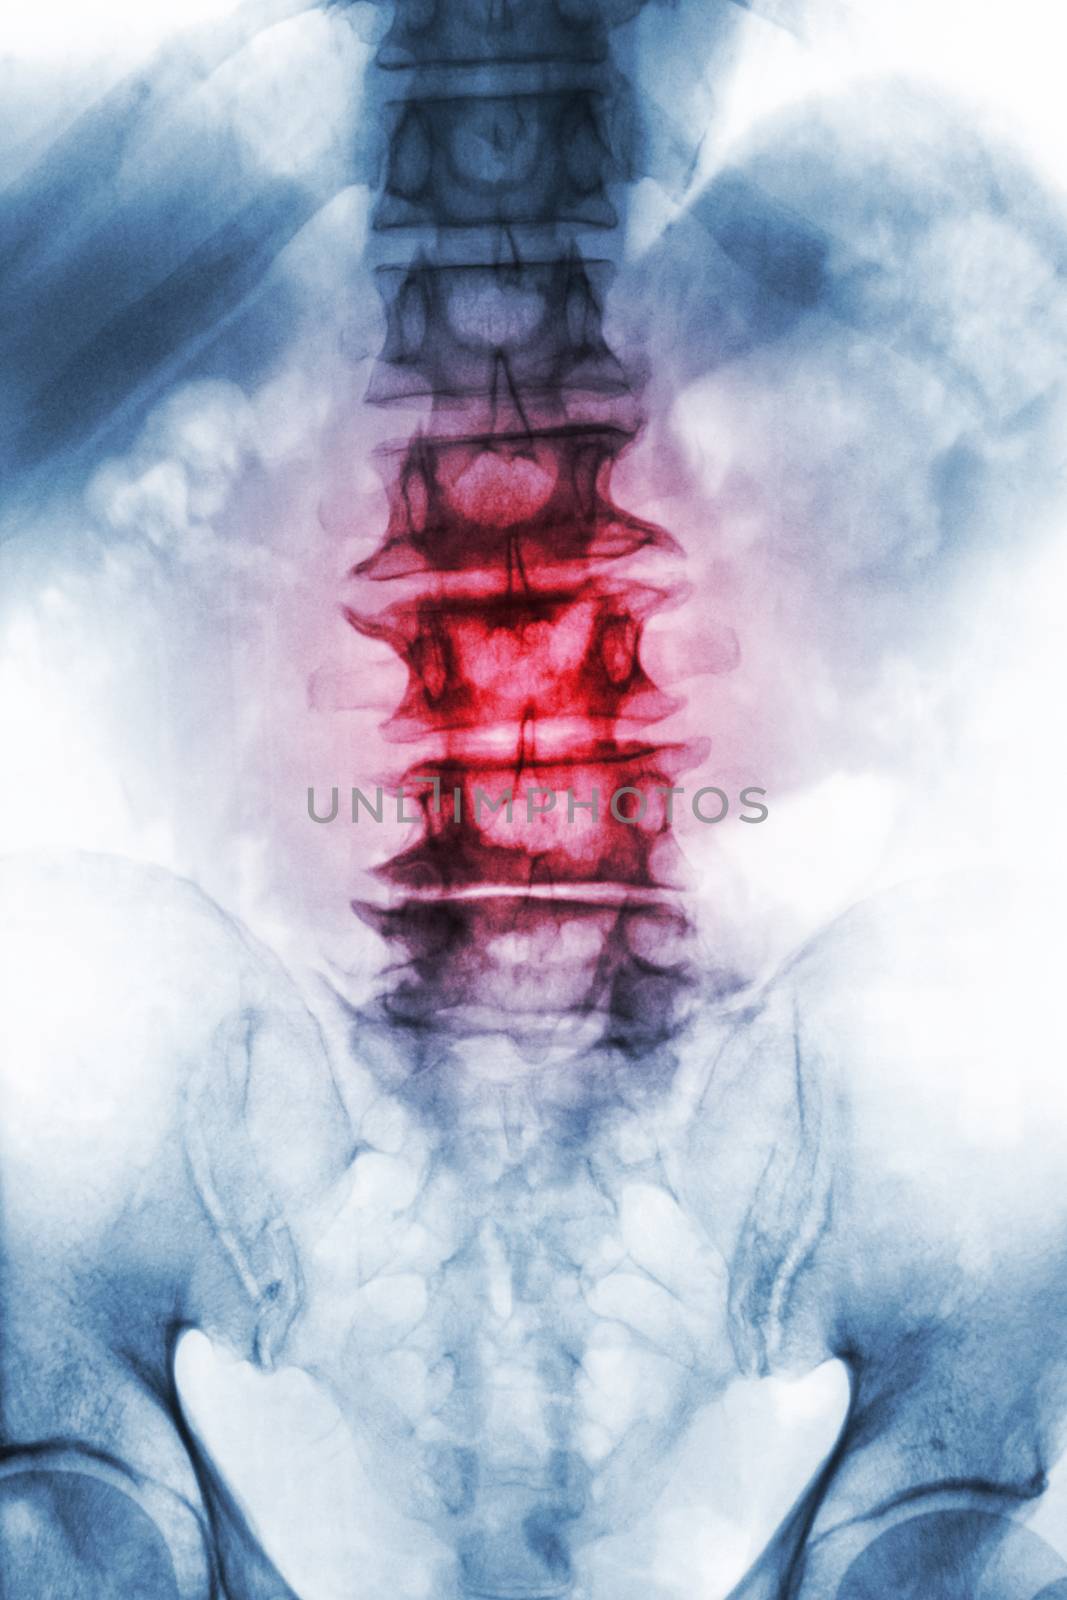 Spondylosis . film x-ray lumbosacral spine of old aged patient show osteophyte , collapse spine from degenerative process . Front view by stockdevil